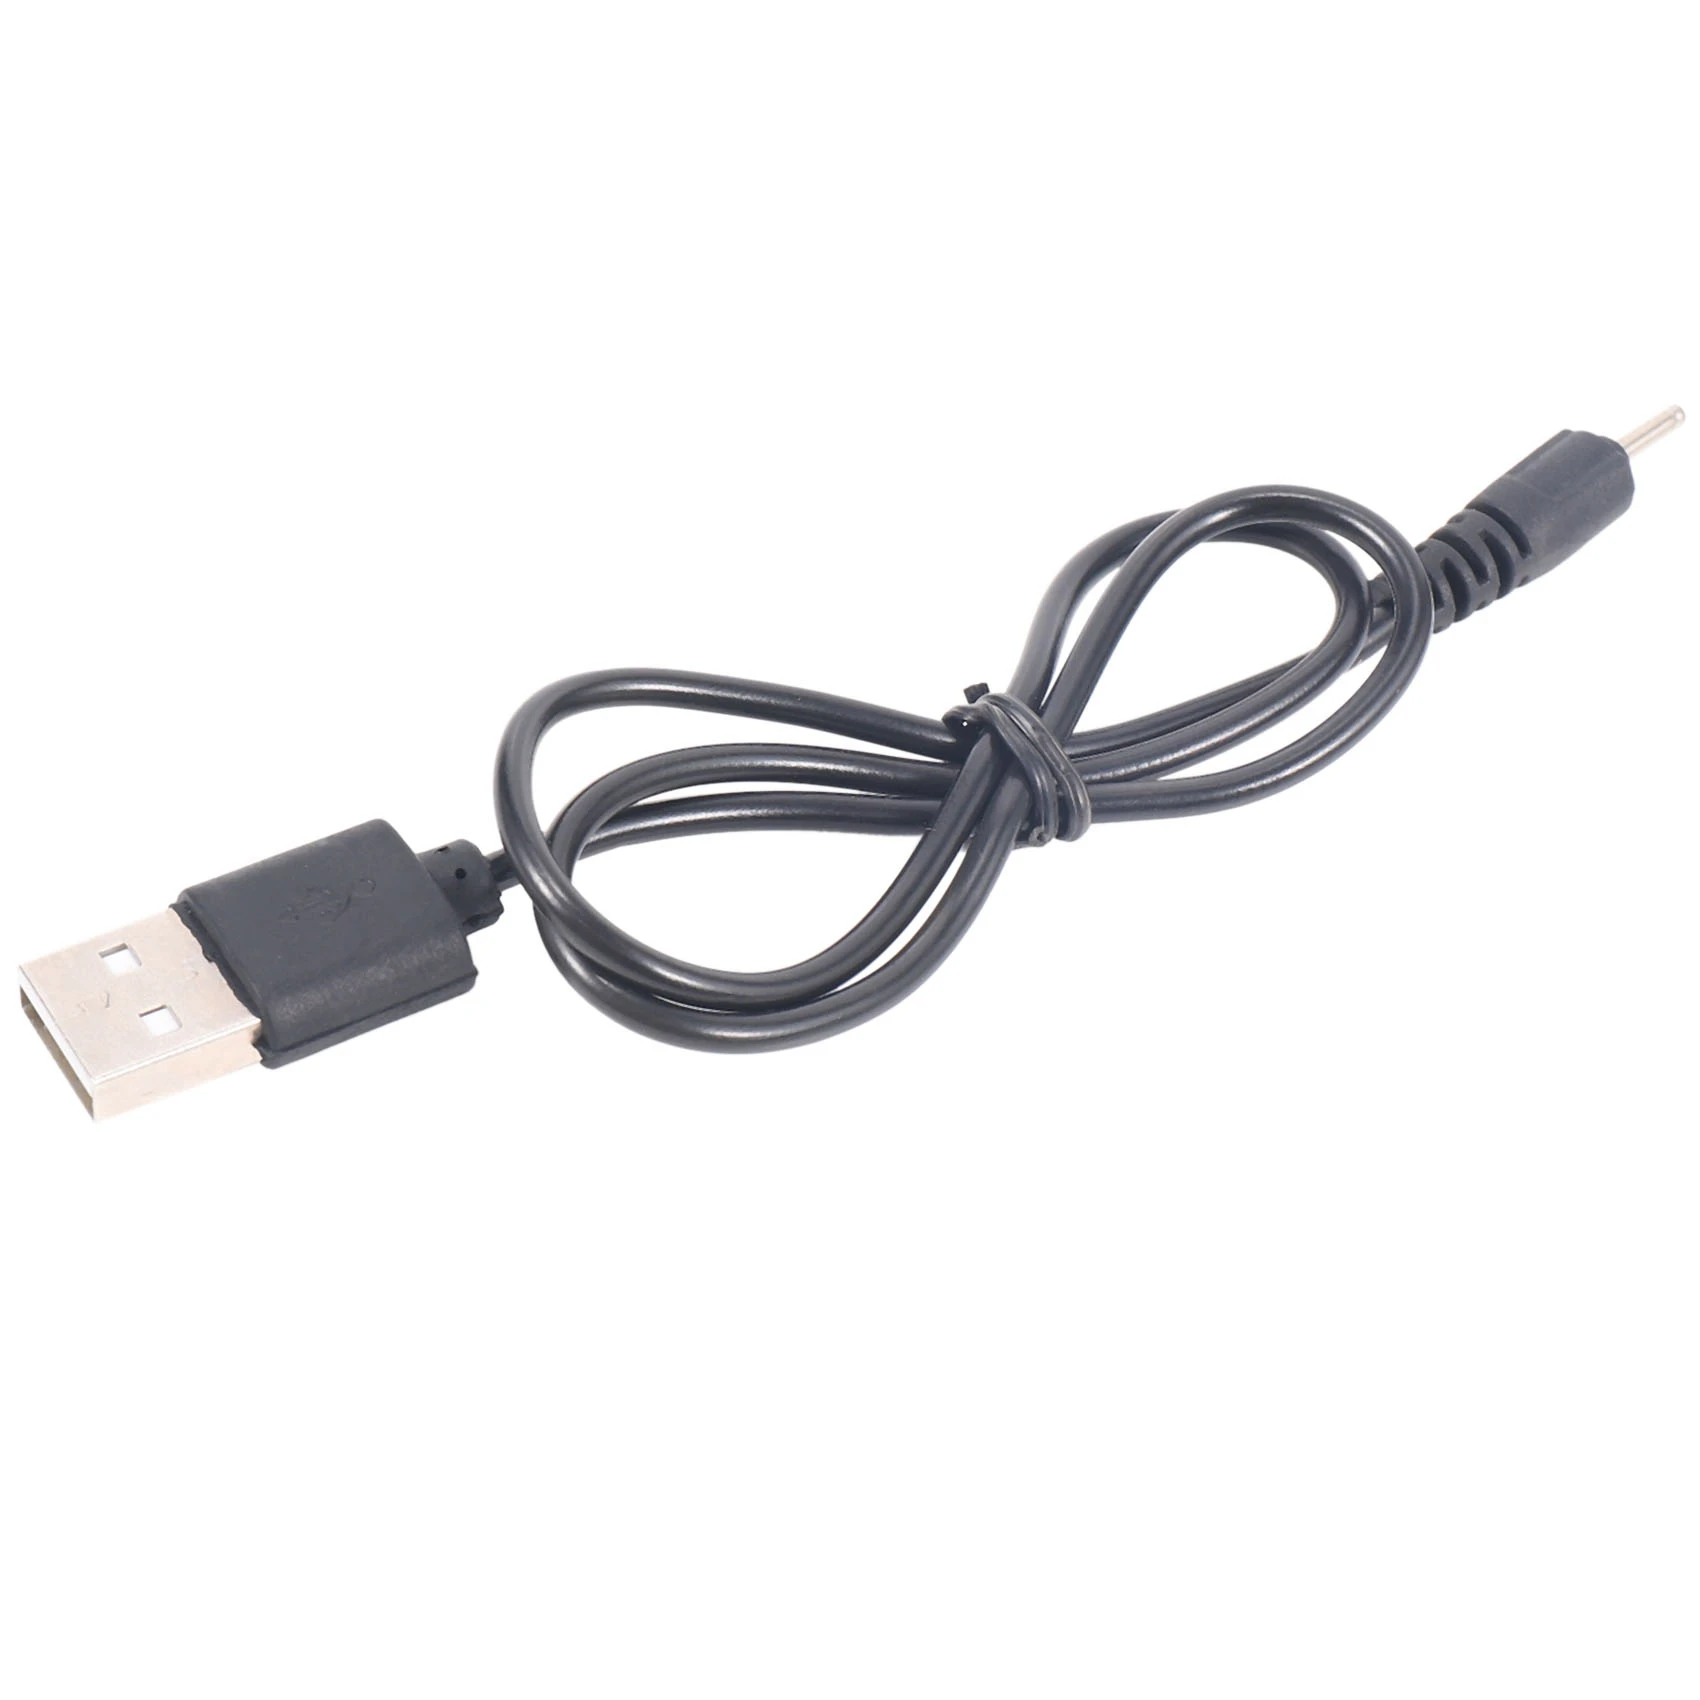 

Black DC 2Mm USB Charging Cable 50 Cm for Nokia N78 N73 N82